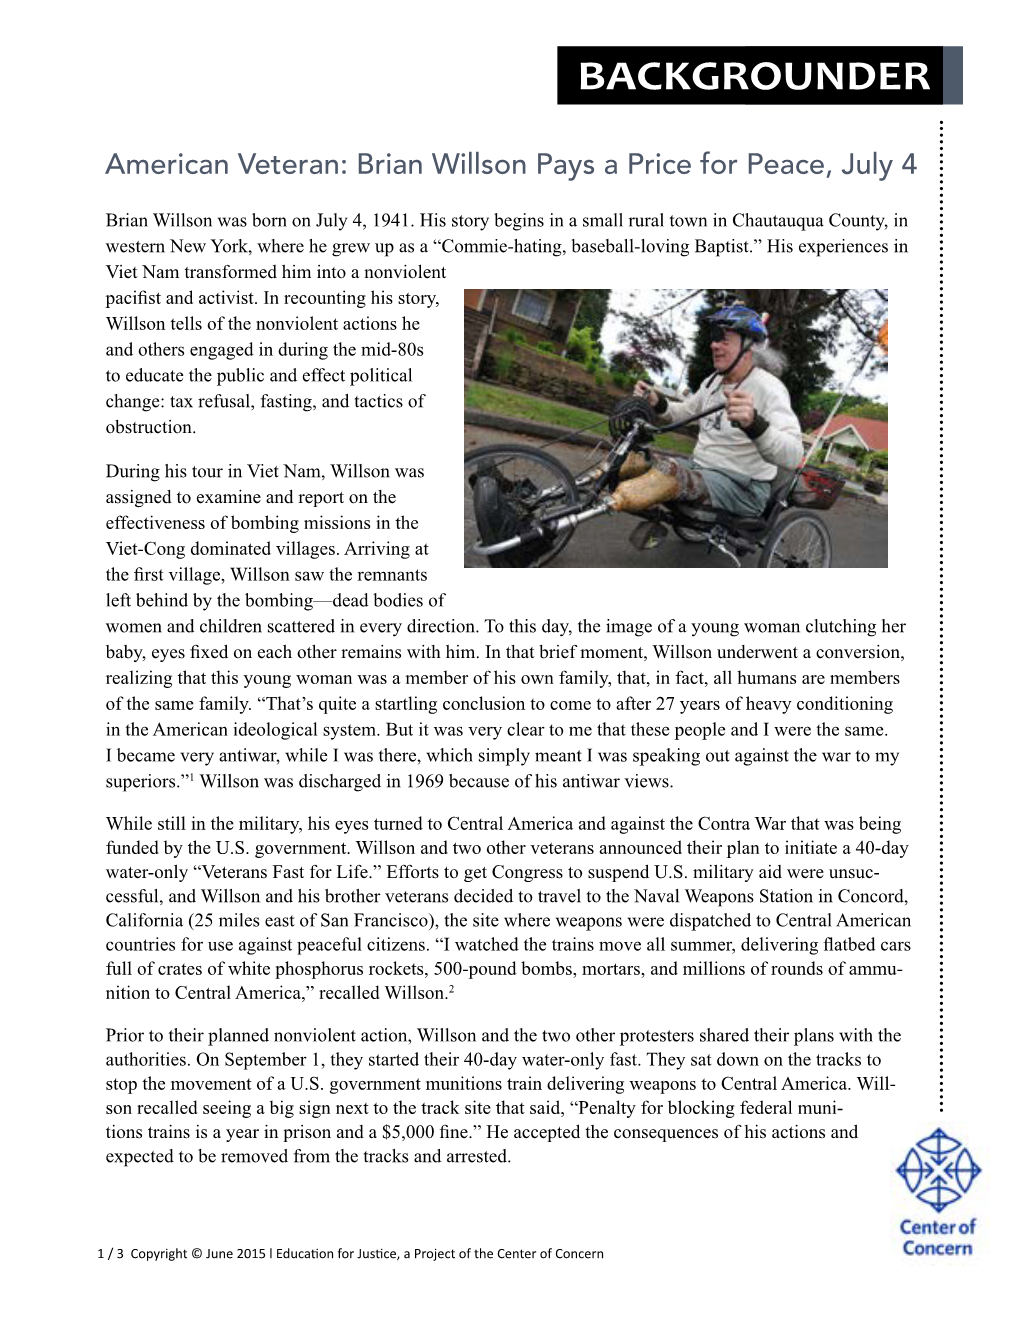 American Veteran: Brian Willson Pays a Price for Peace, July 4